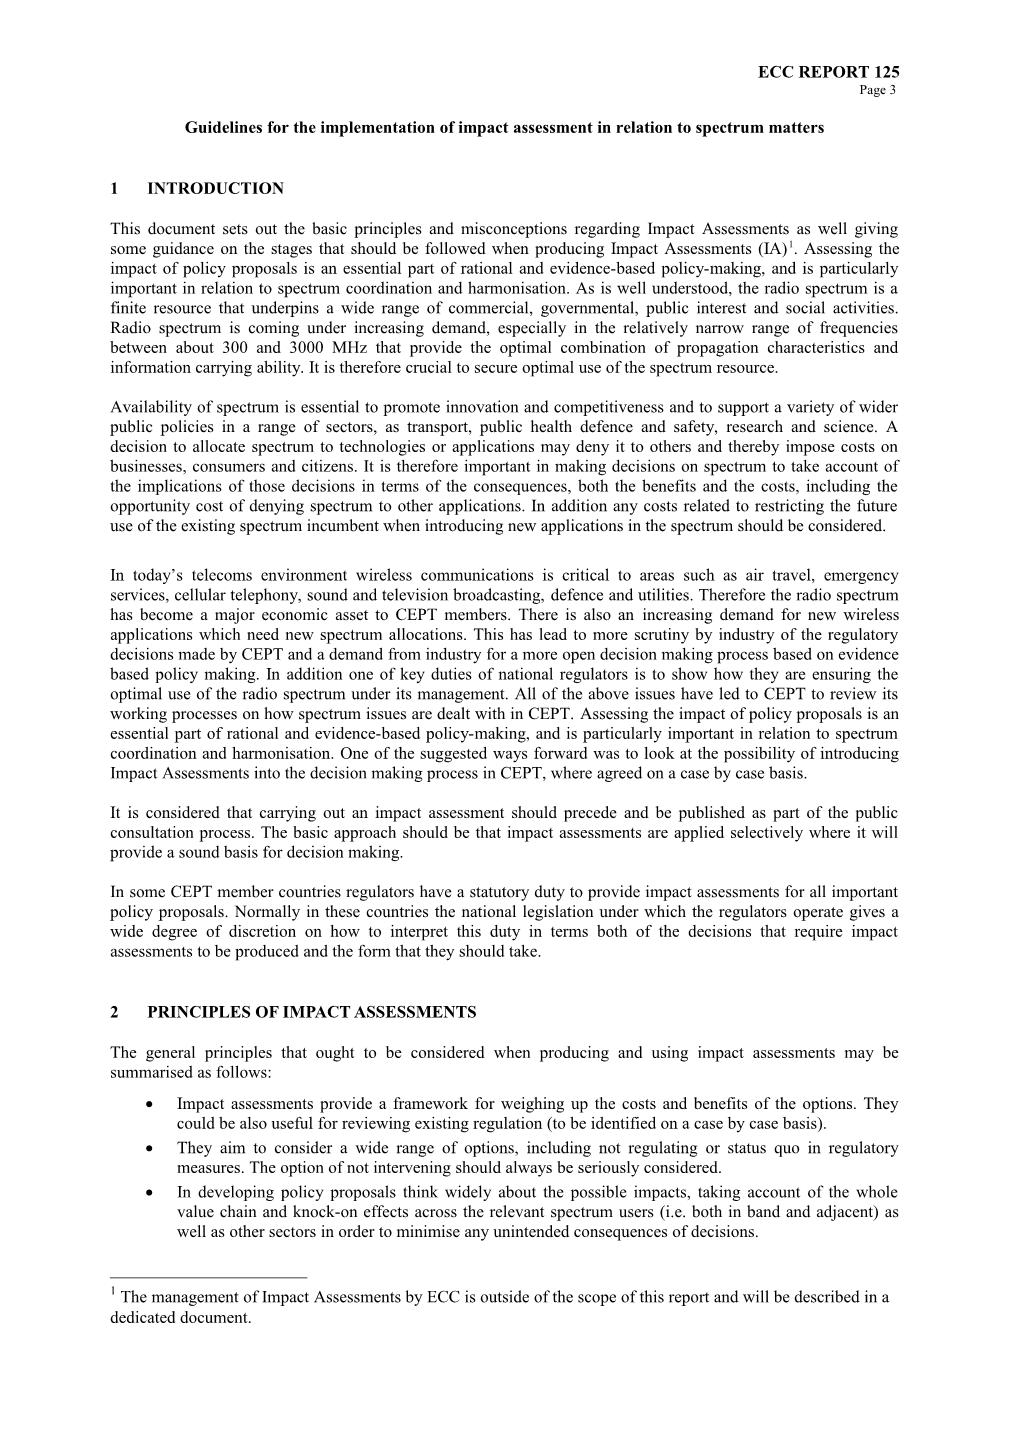 Guidelines for the Implementation of Impact Assessment in Relation to Spectrum Matters